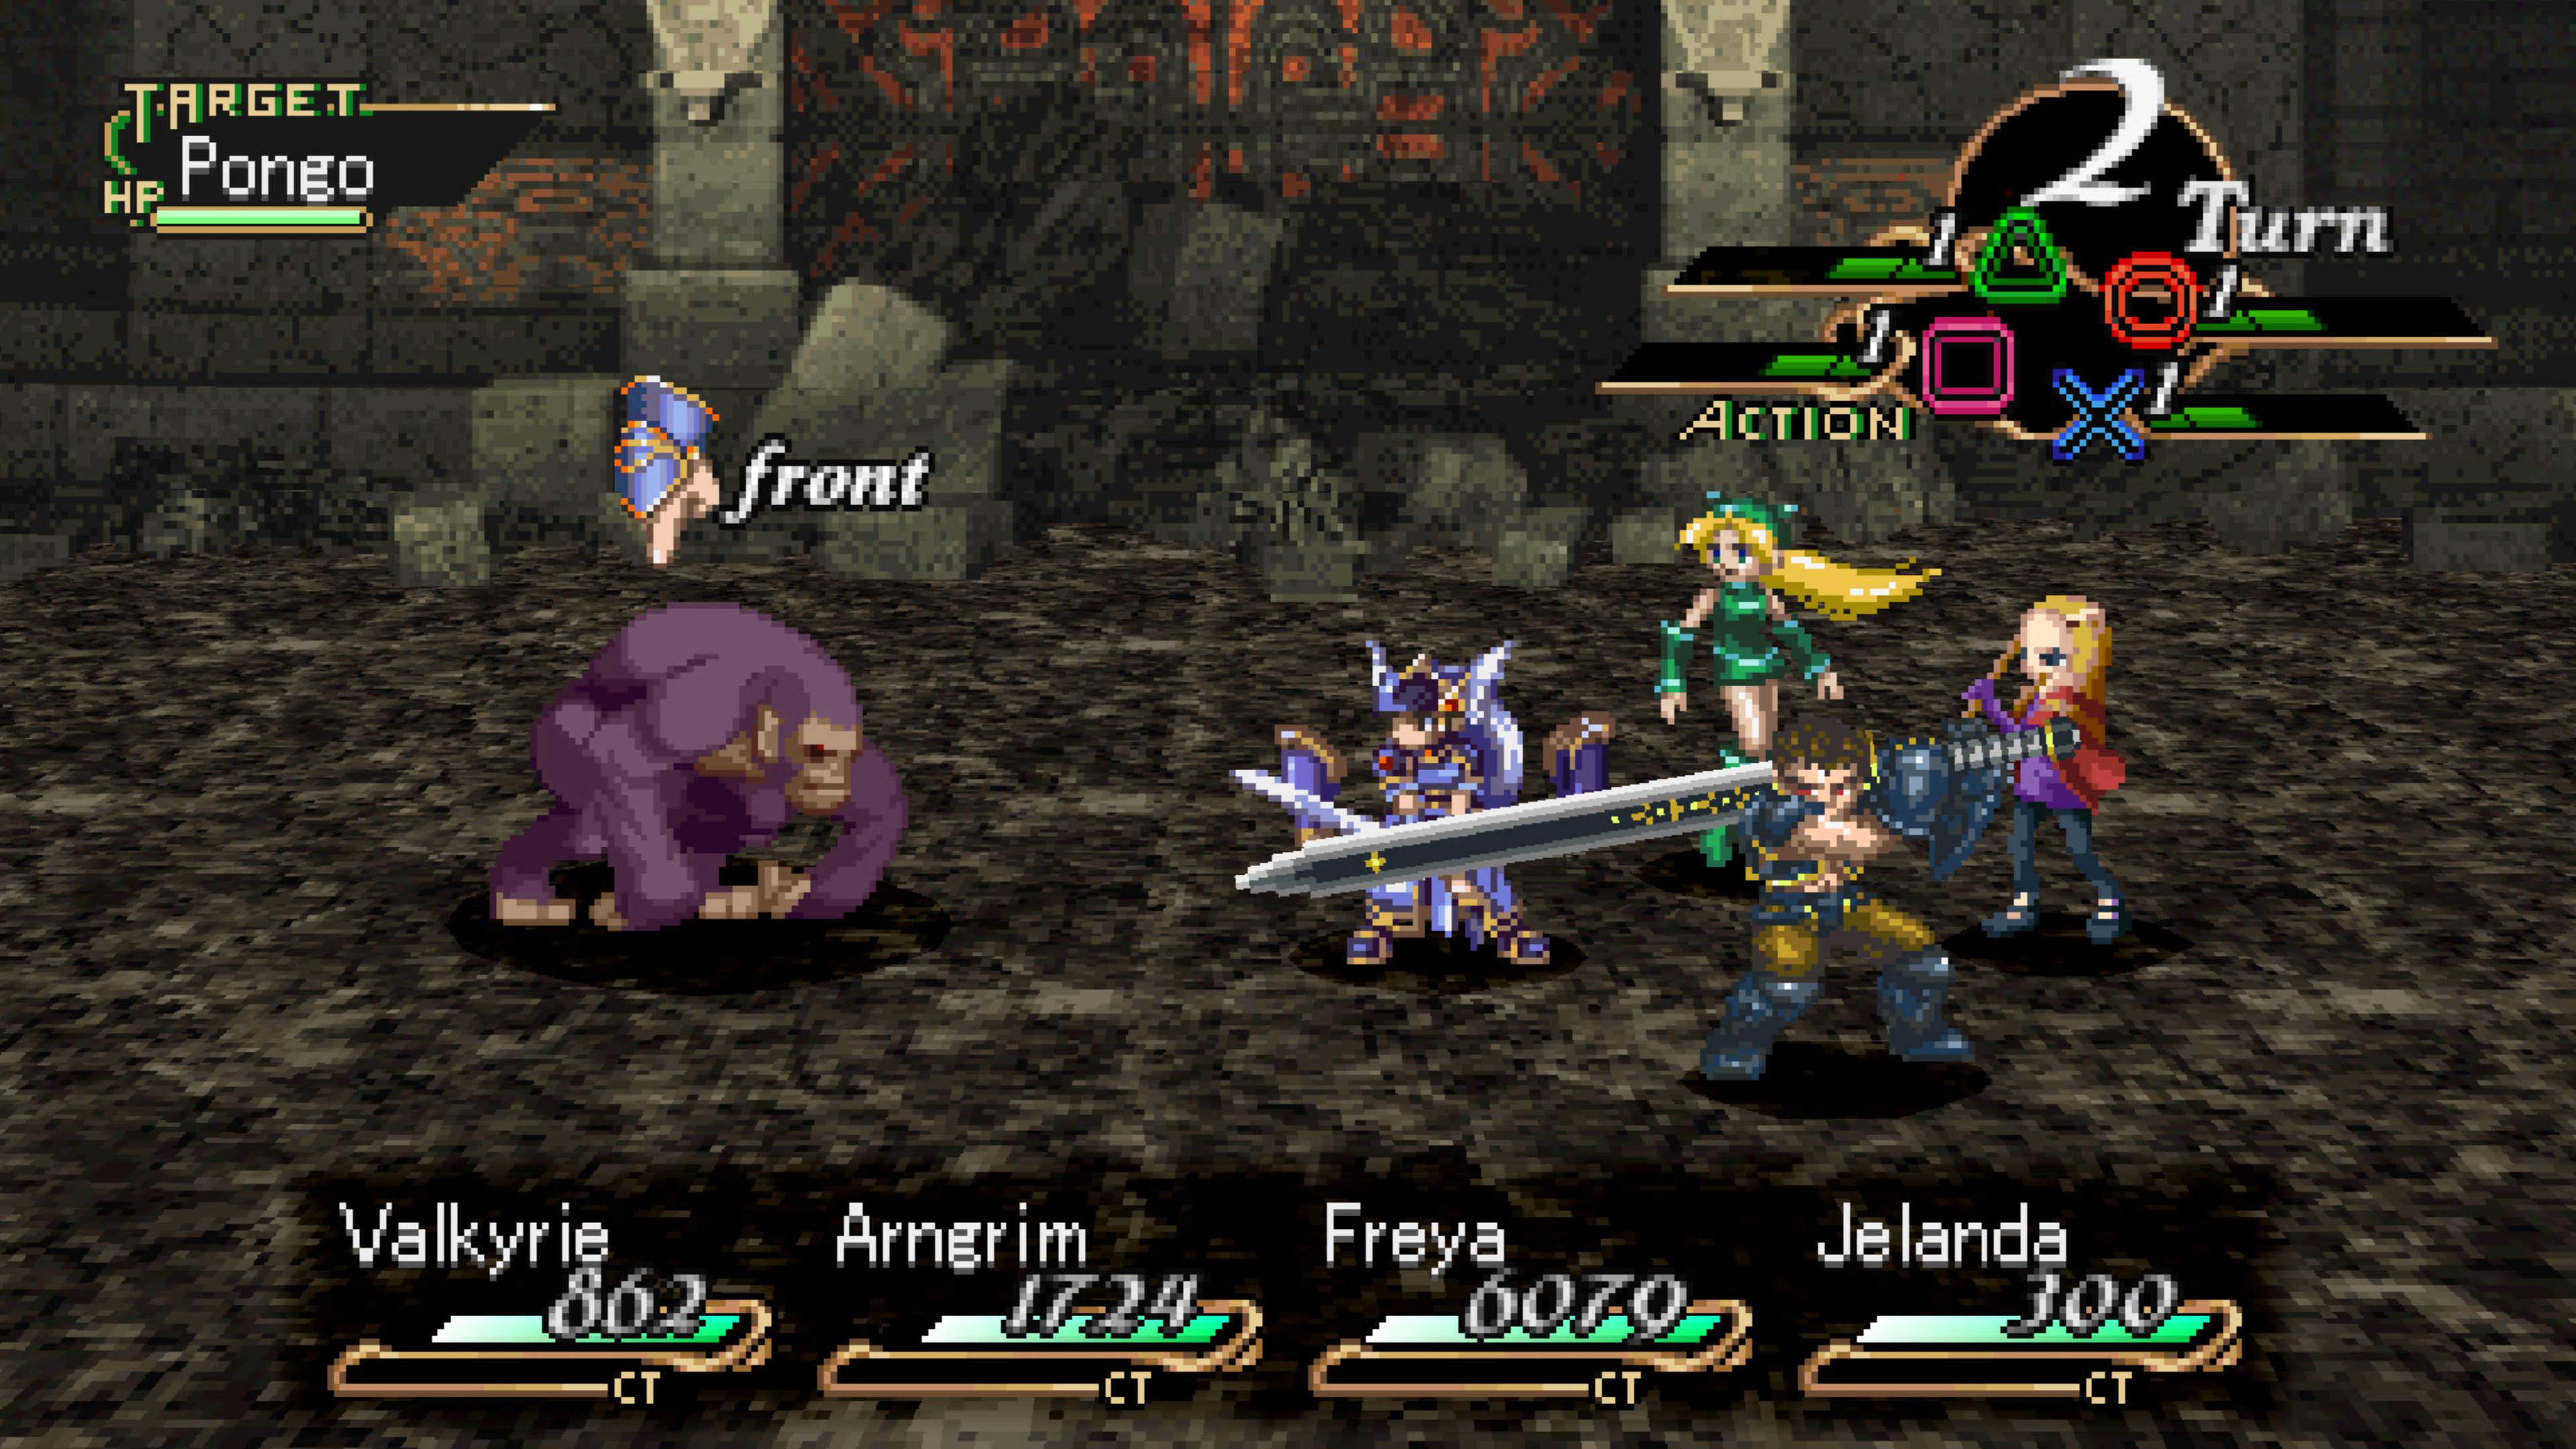 Party of 4 warriors facing a gorilla in a pixelized dungeon